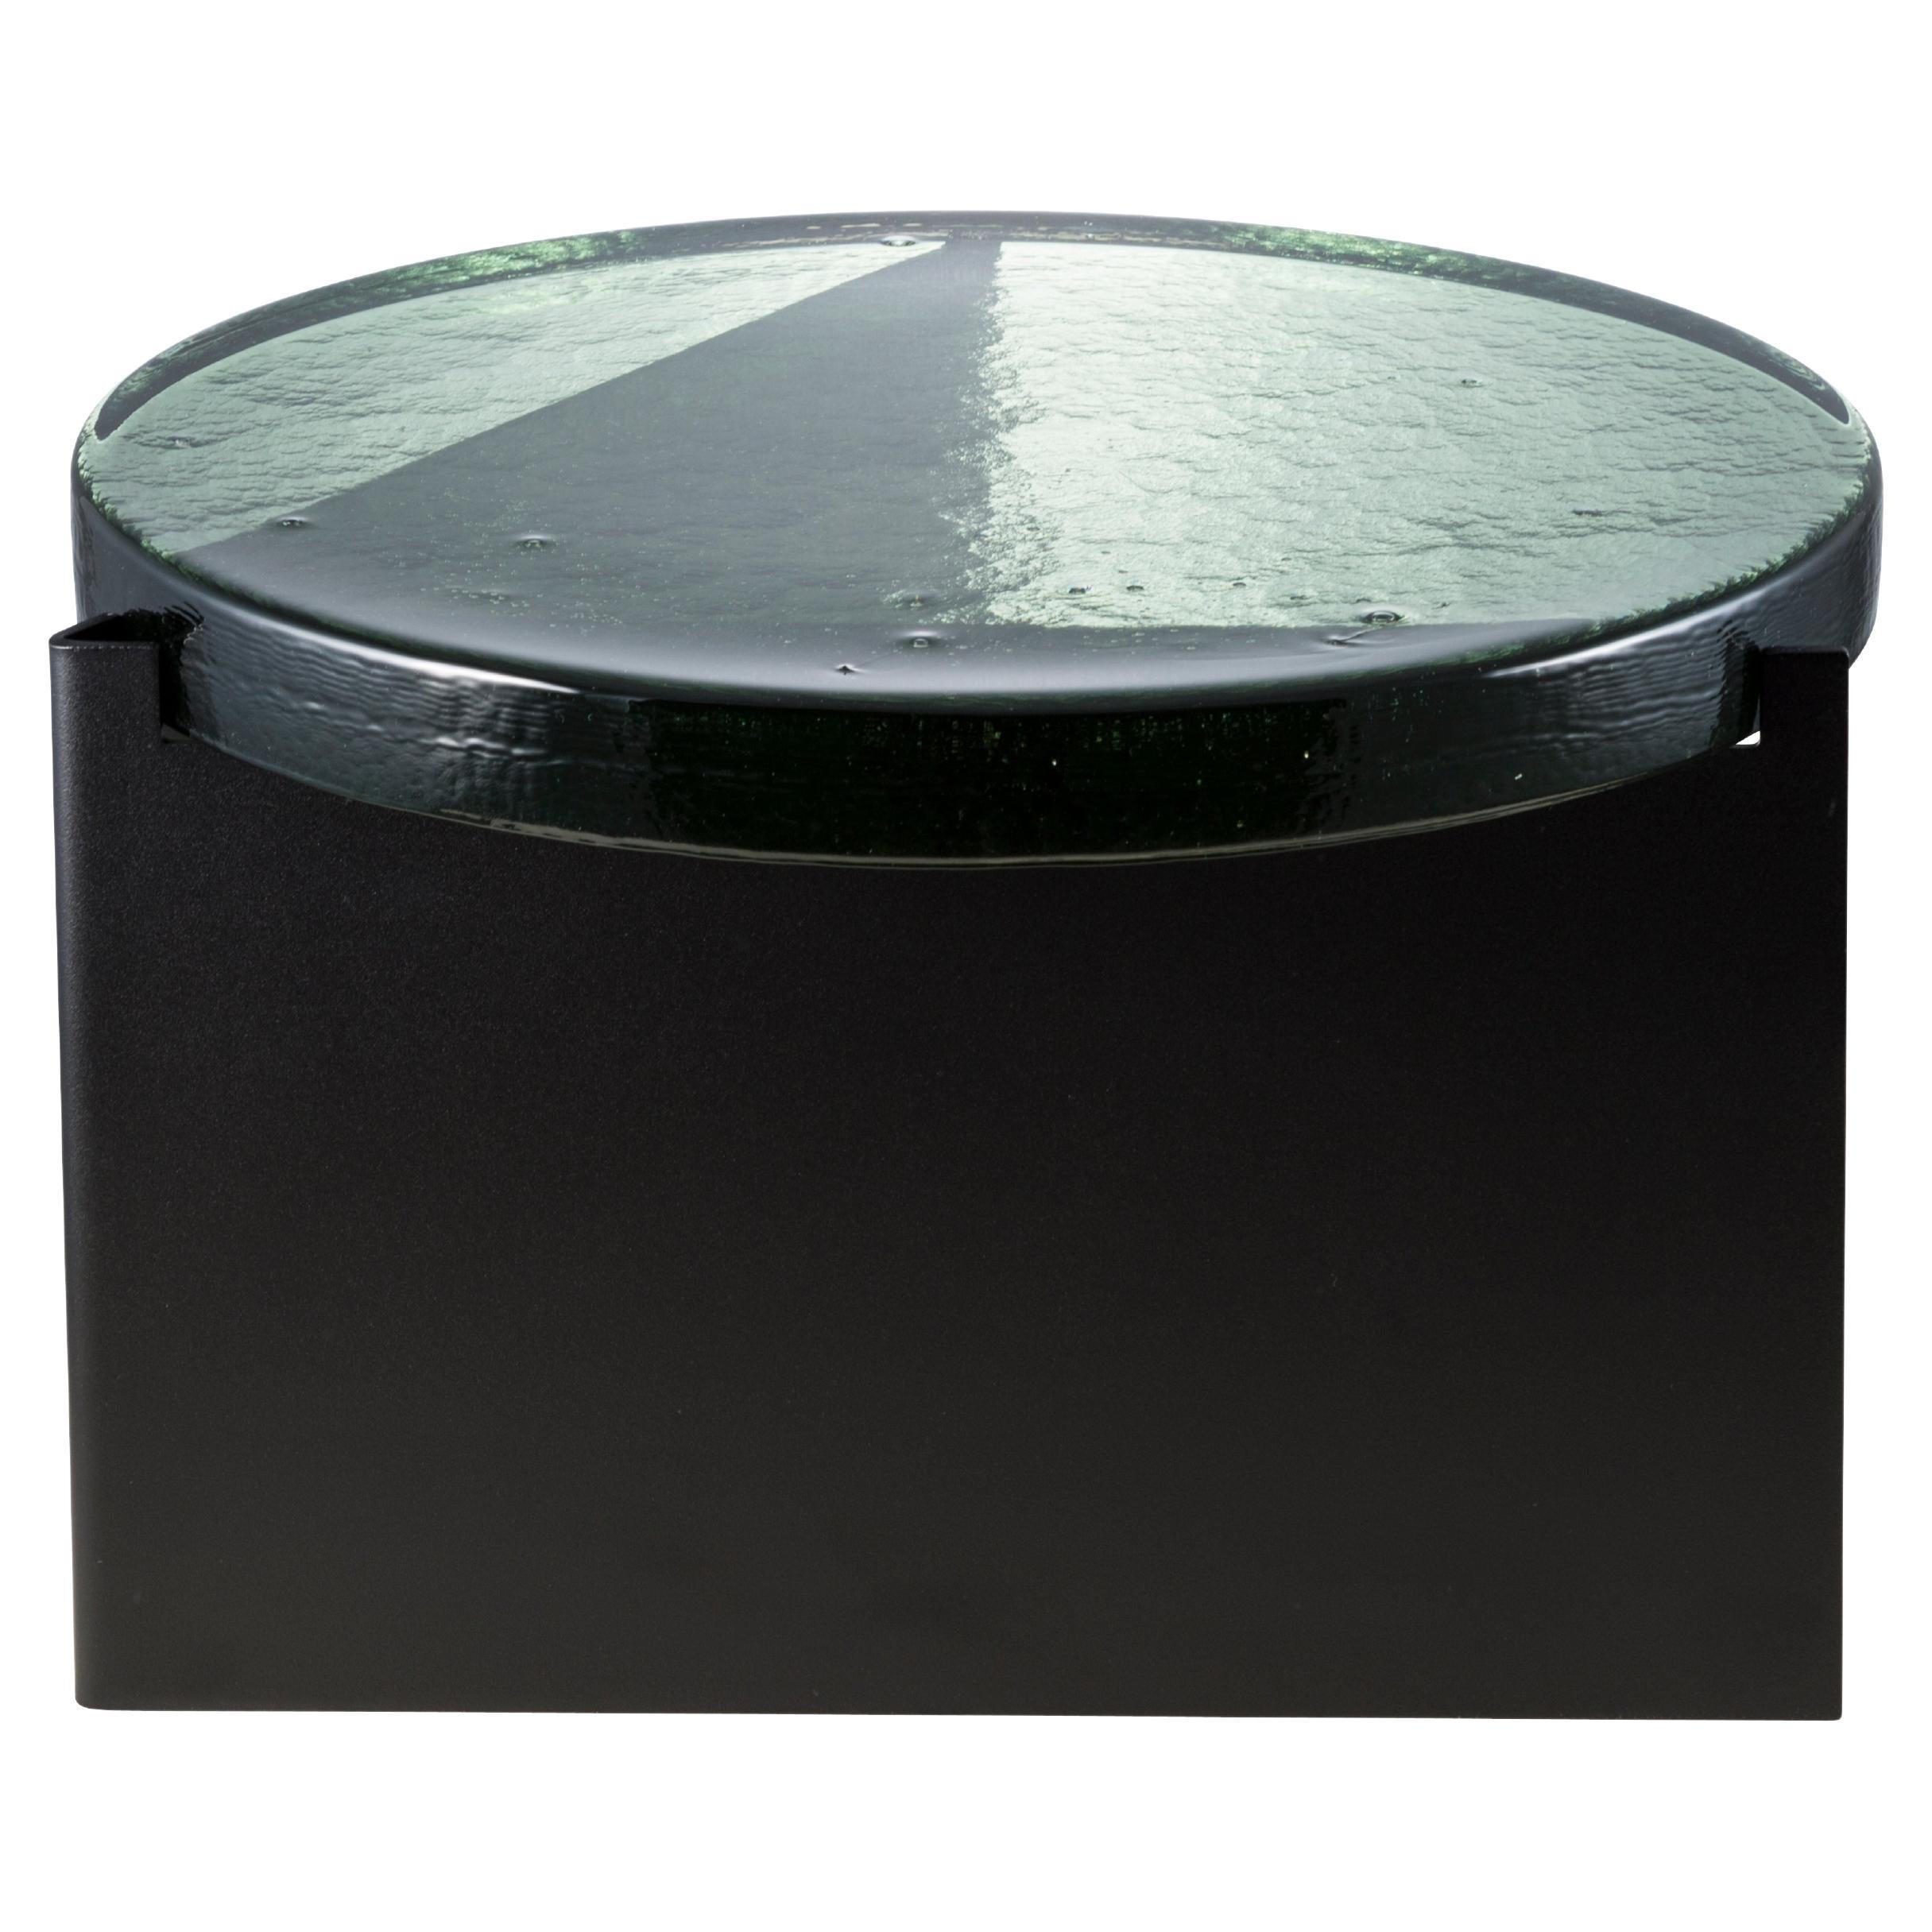 Alwa One Big Green Black Coffee Table by Pulpo For Sale